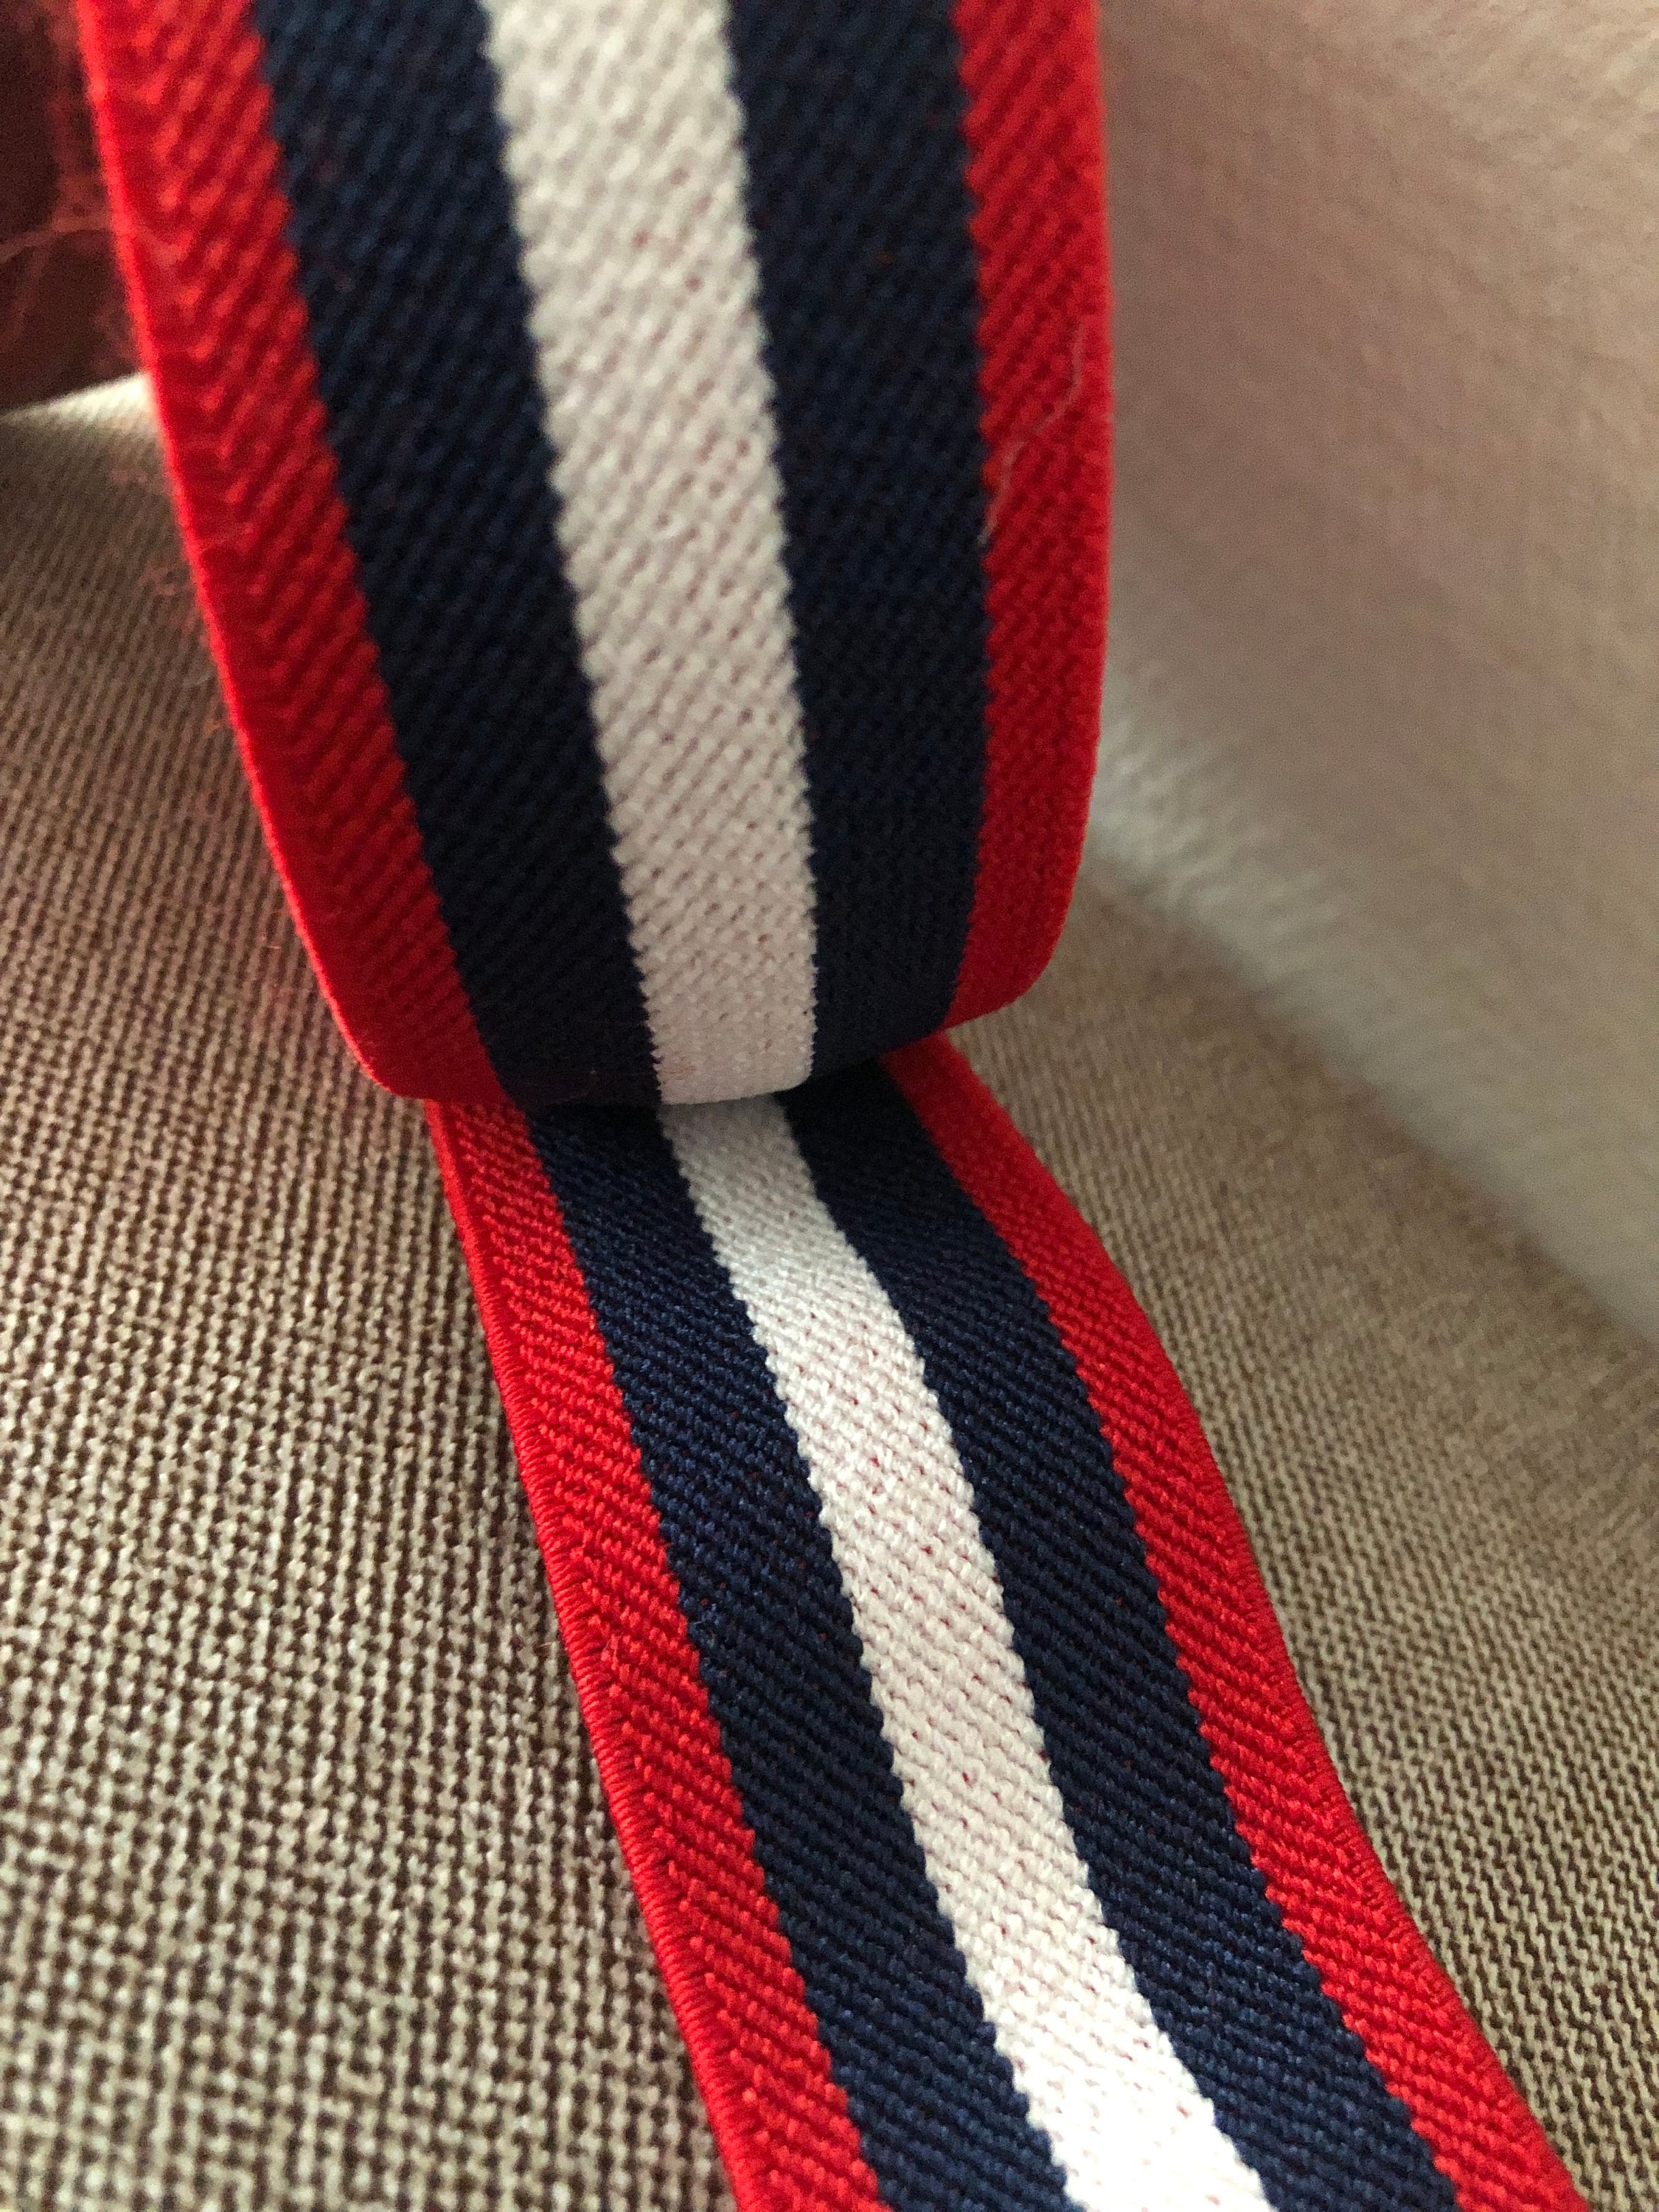 Comfortable Plush Elastic With Stripes, Waistband Elastic, Soft Elastic,  Elastic Band, Sewing Elastic by the Yard, Elastic 38mm 